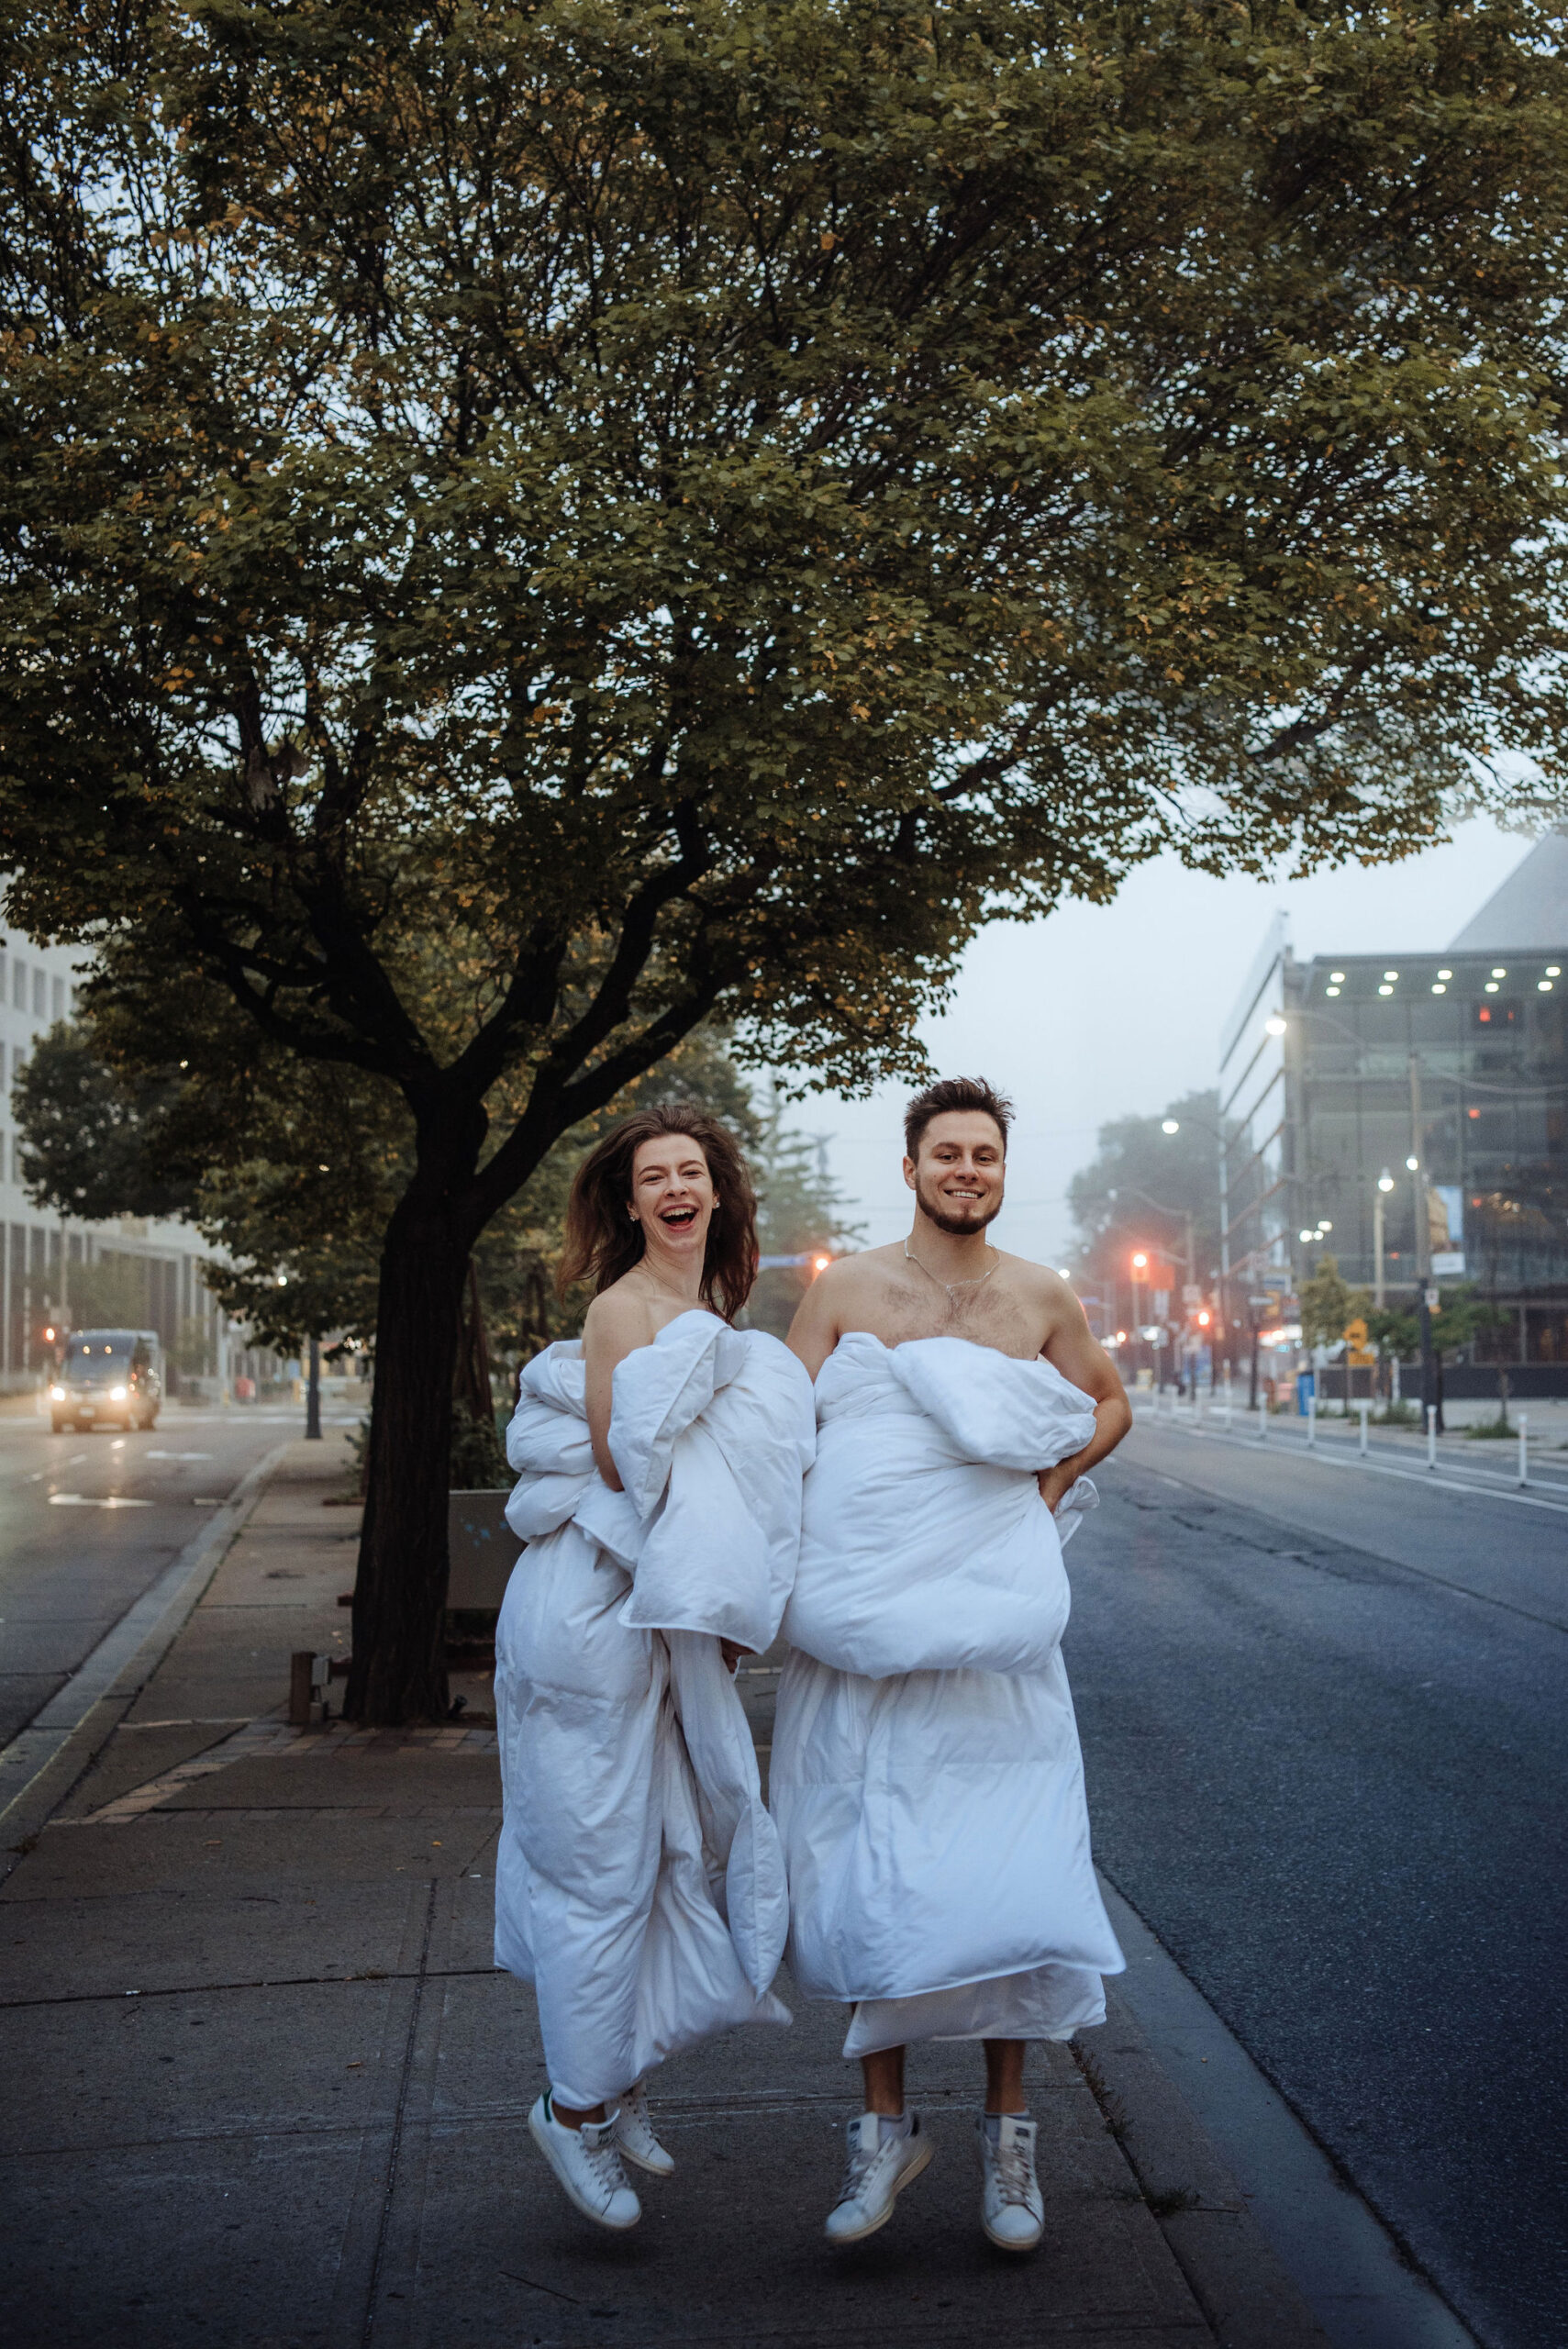 Wrapped In Blankets: Engagement Photoshoot | Popped Blog